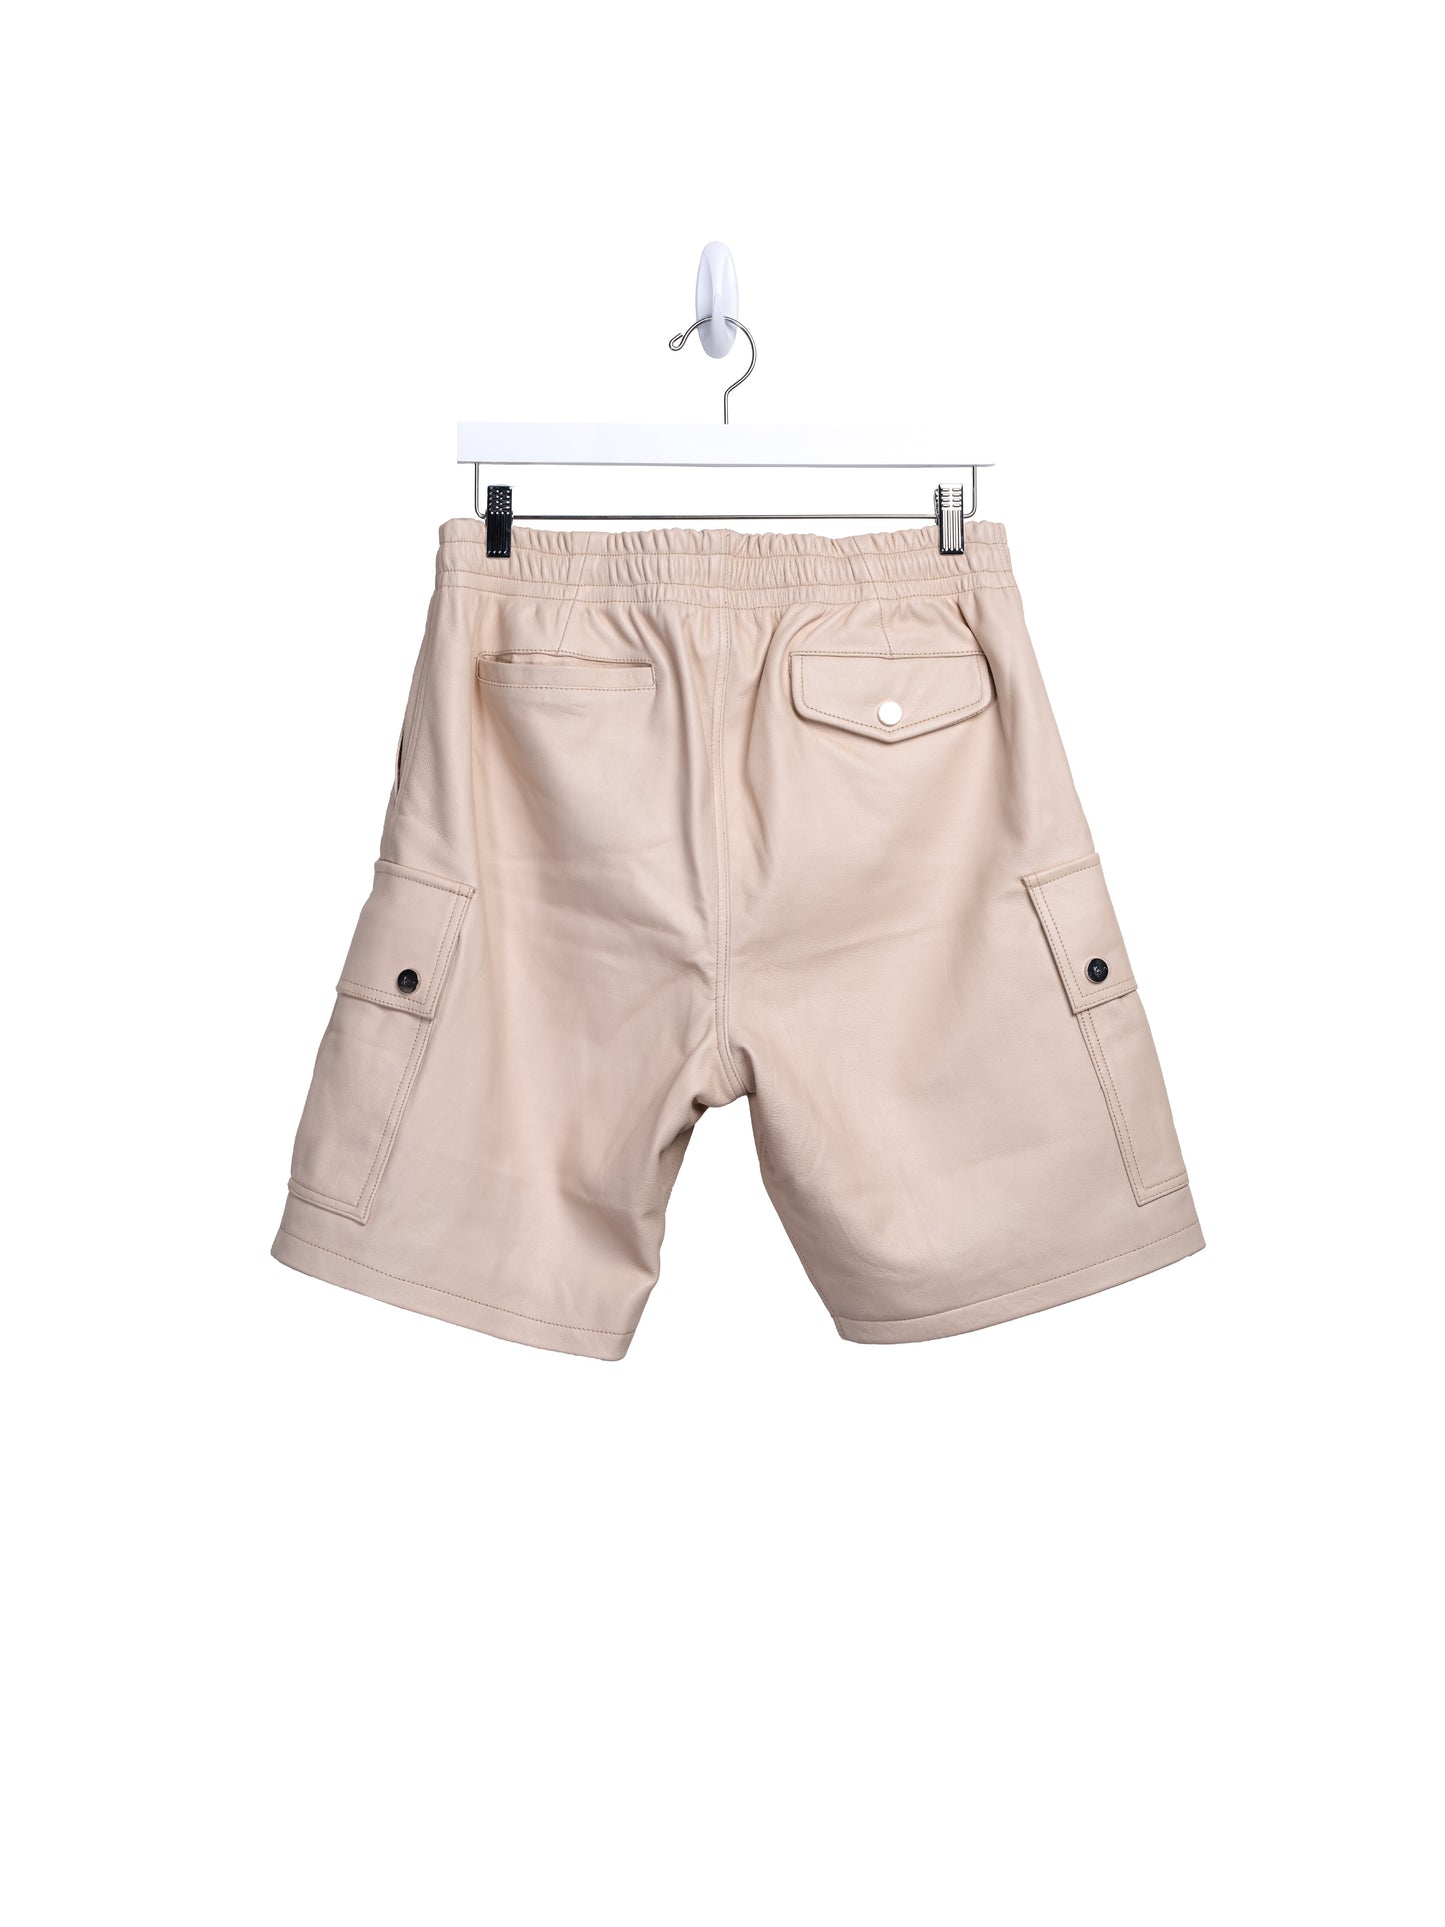 Mace Leather Cargo Shorts (Natural)